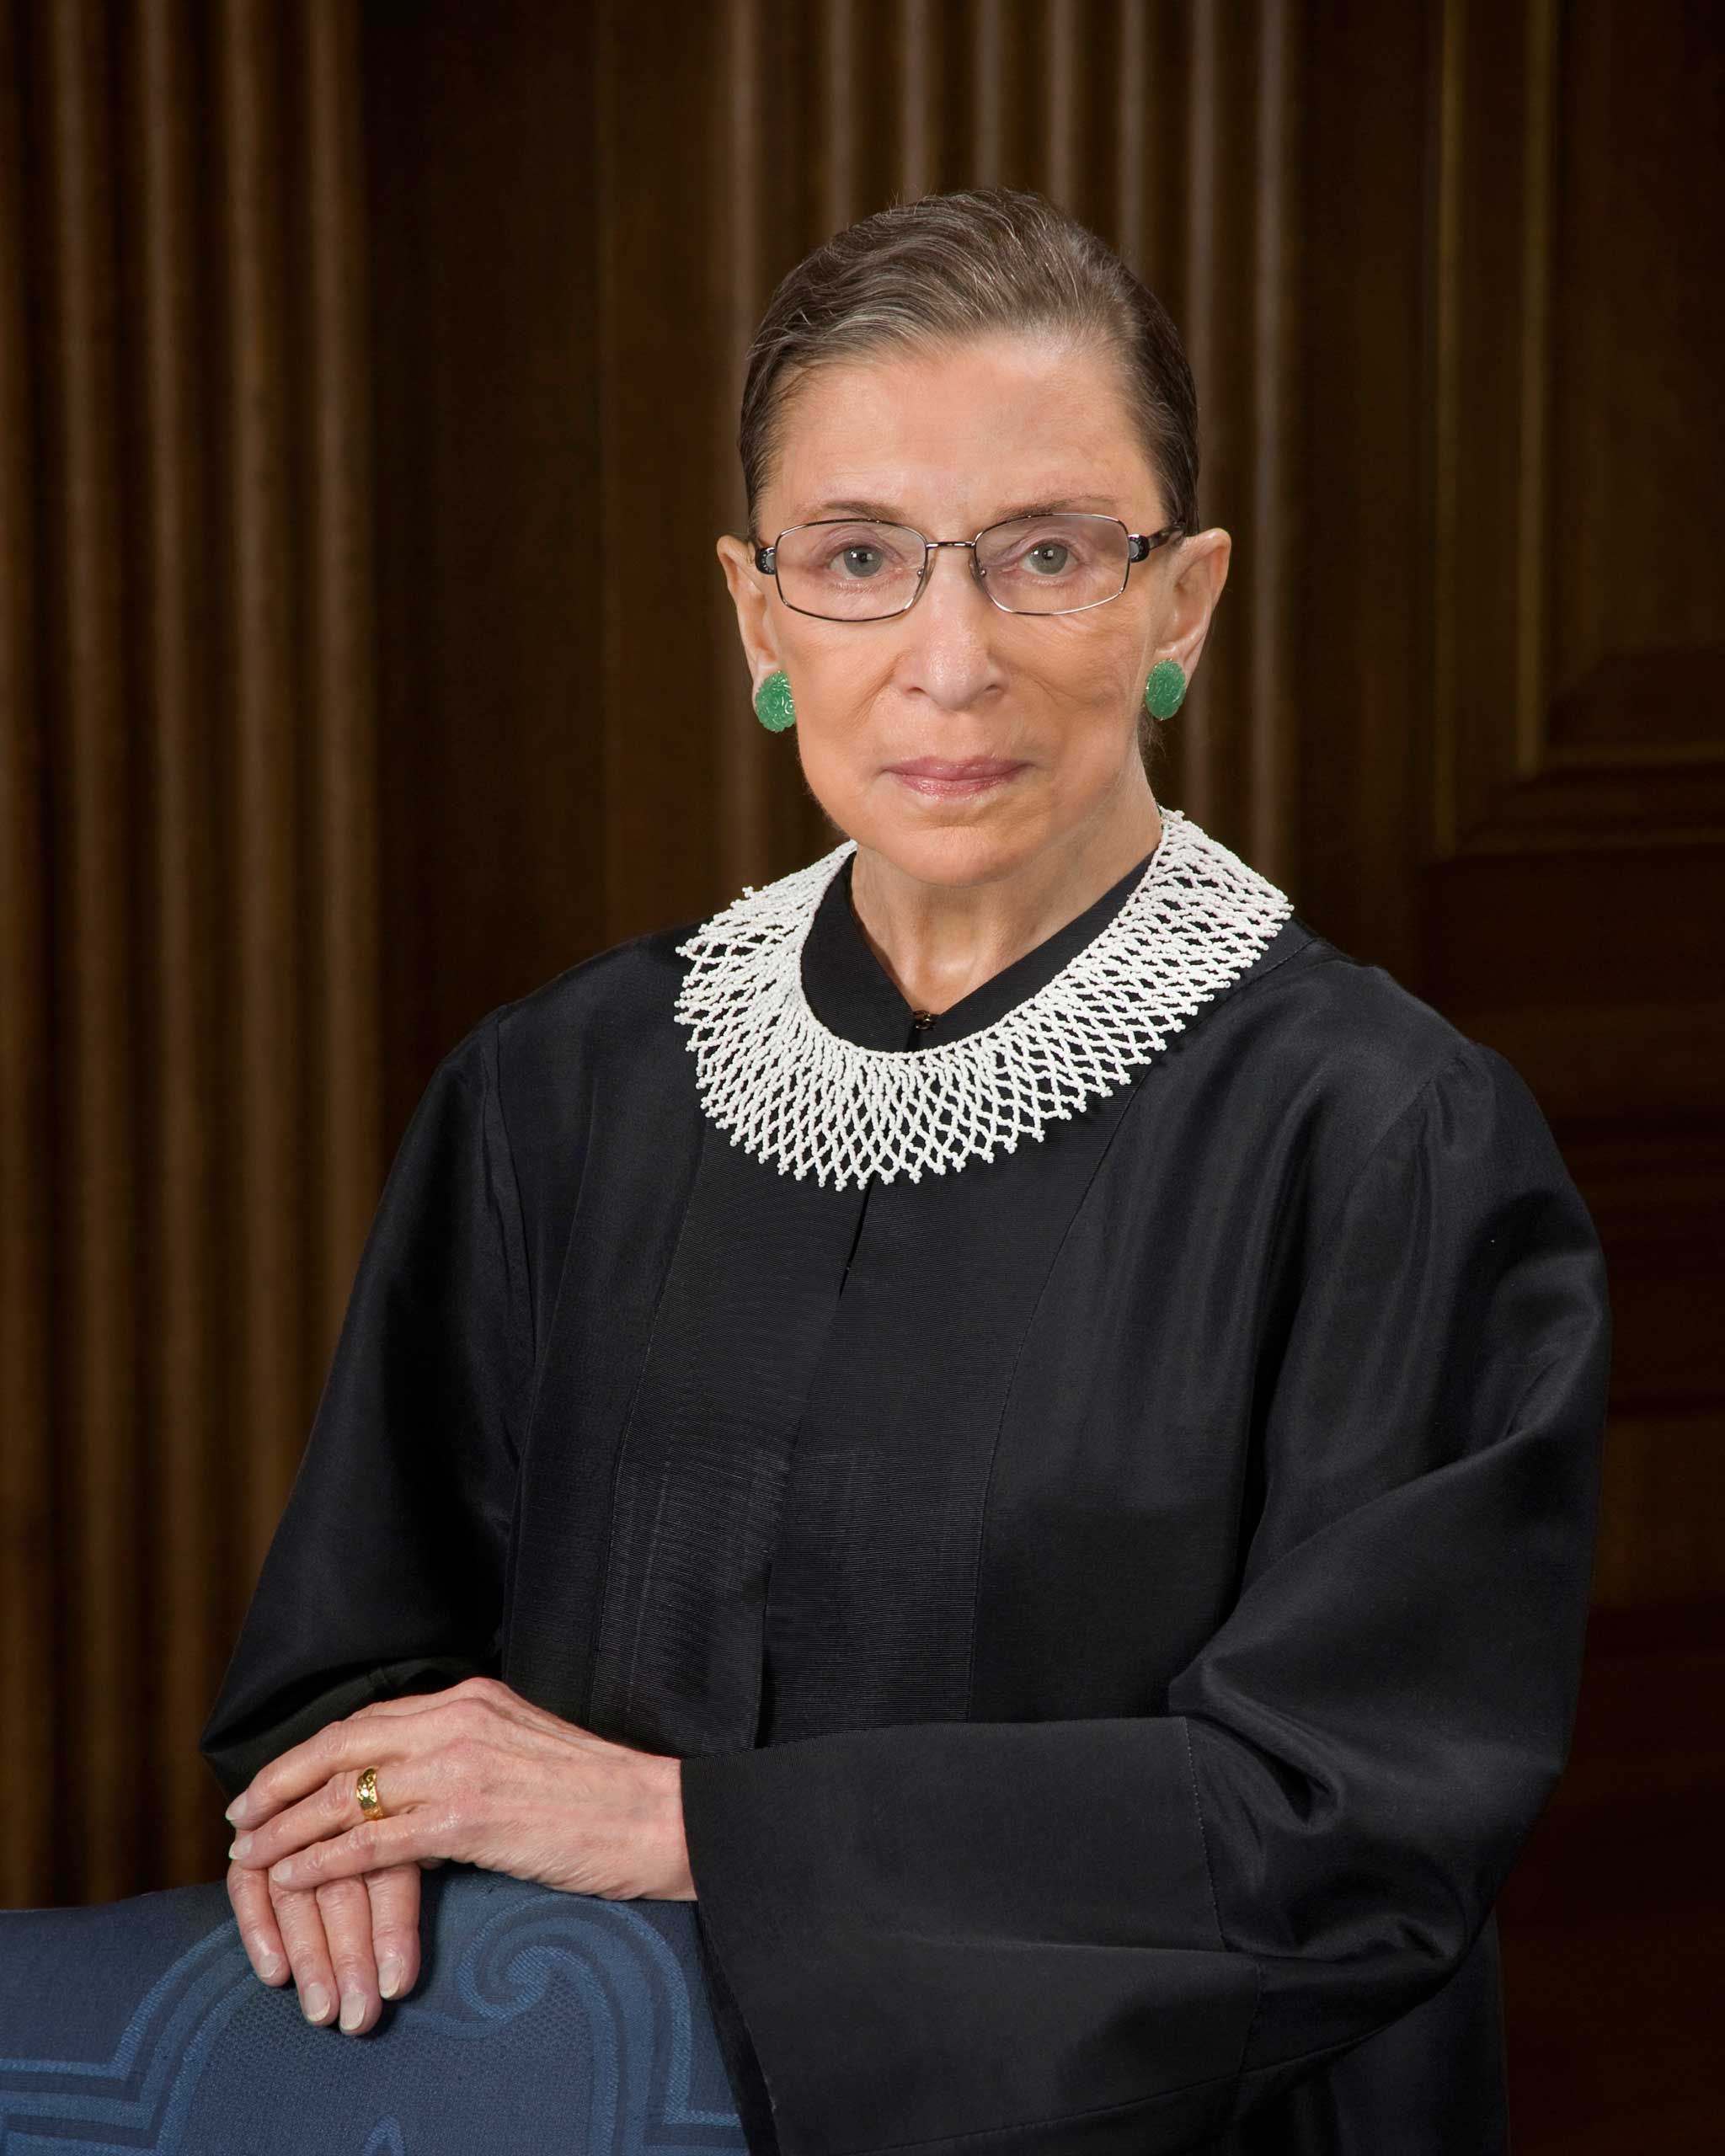 Official portrait of Justice Ruth Bader Ginsburg (Steve Petteway—Collection of the Supreme Court of the United States)